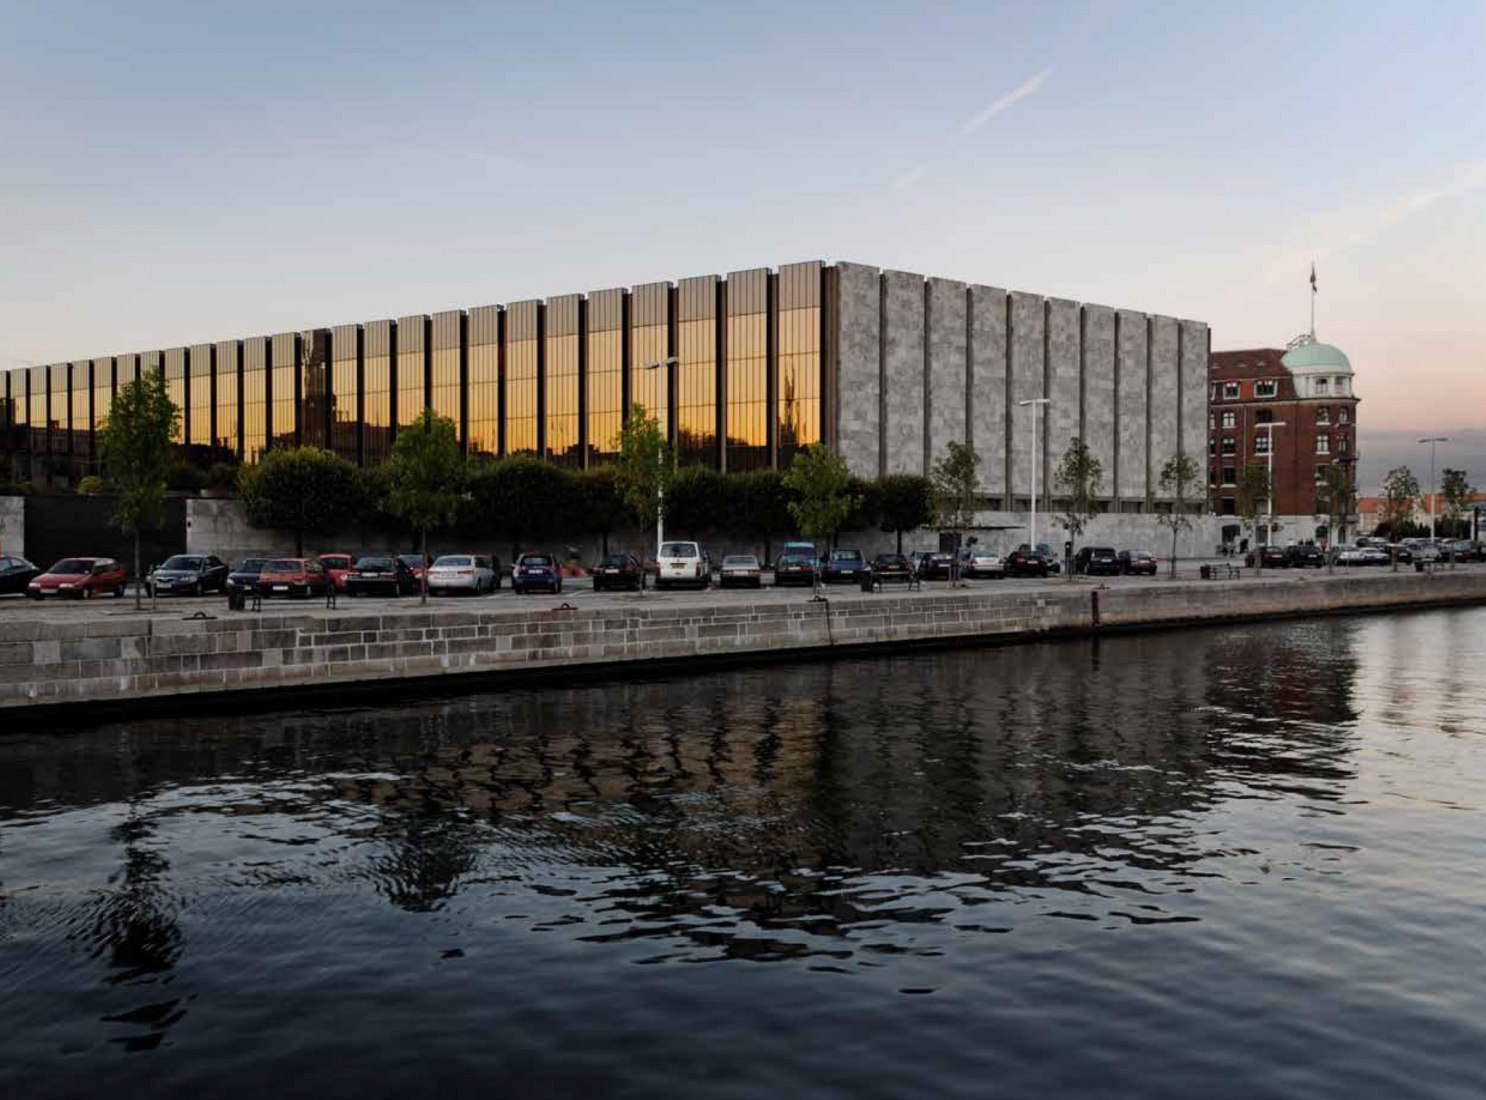 National Bank of Denmark, designed by Arne Jacobsen, in the middle of Copenhagen, between 1966 and 1978. Image courtesy of National Bank of Denmark